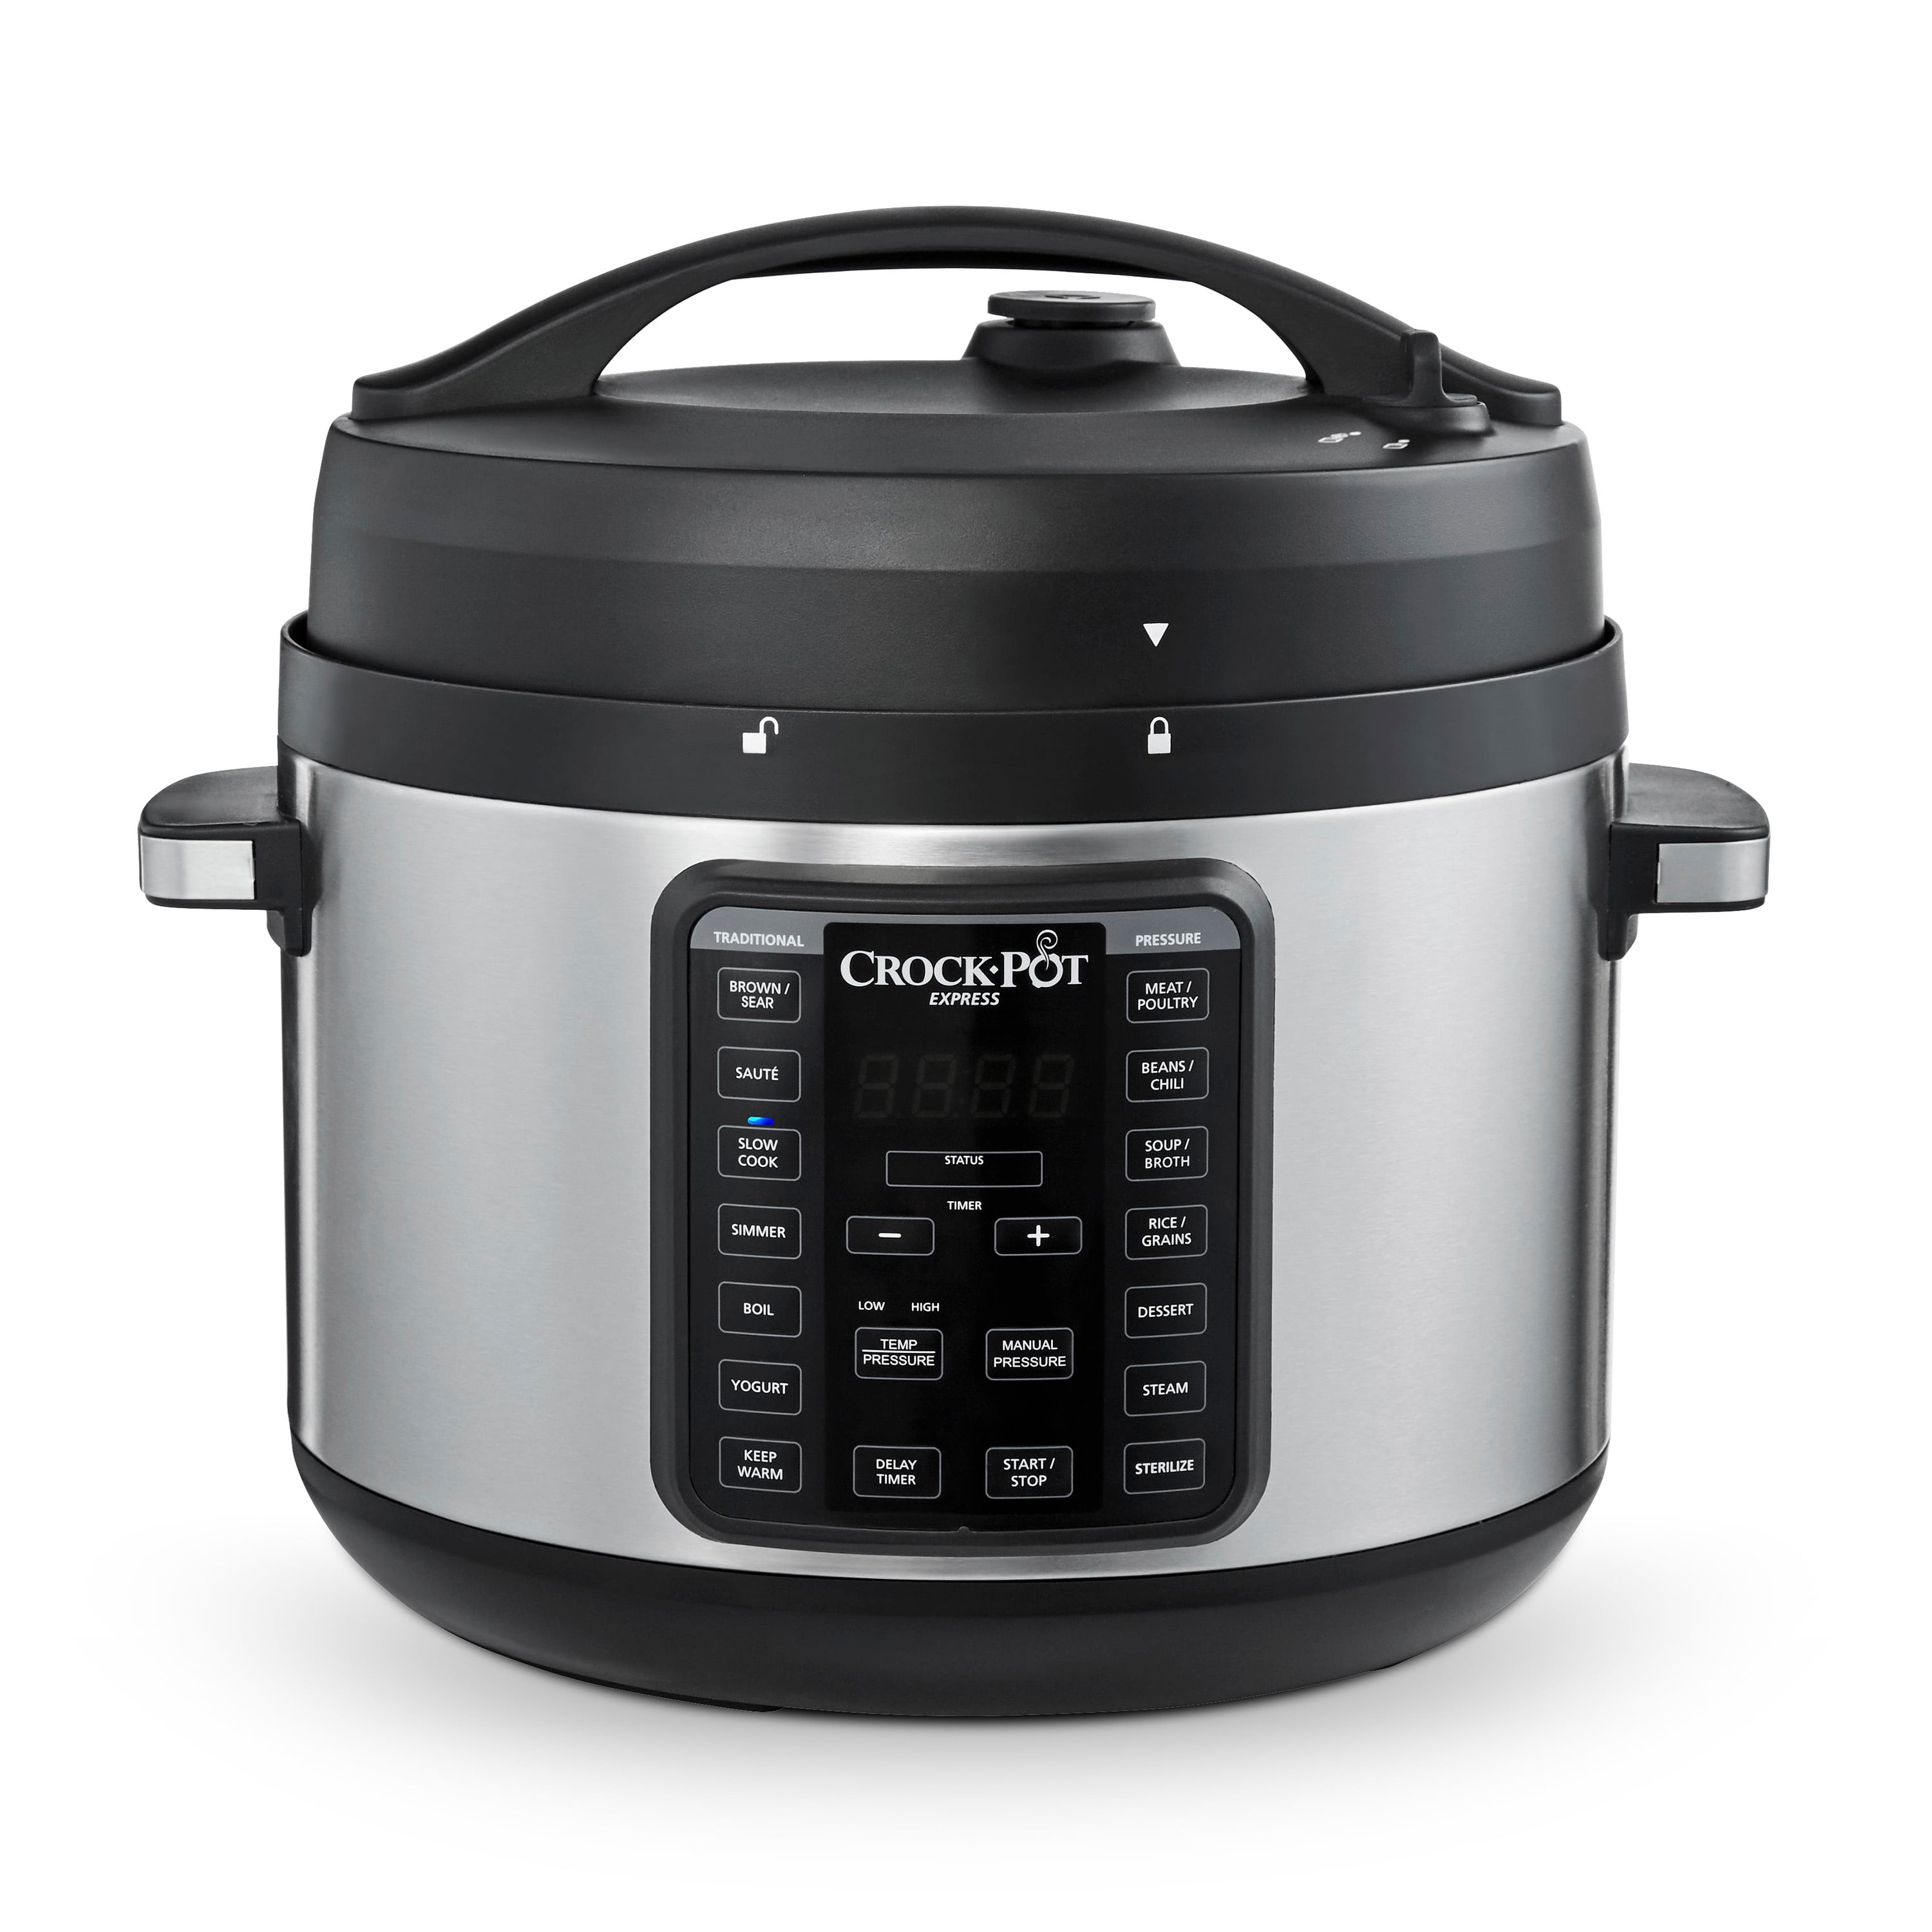 Crock-Pot's family-sized 10-quart multi-cooker is down to $70 shipped today  (Reg. $150)